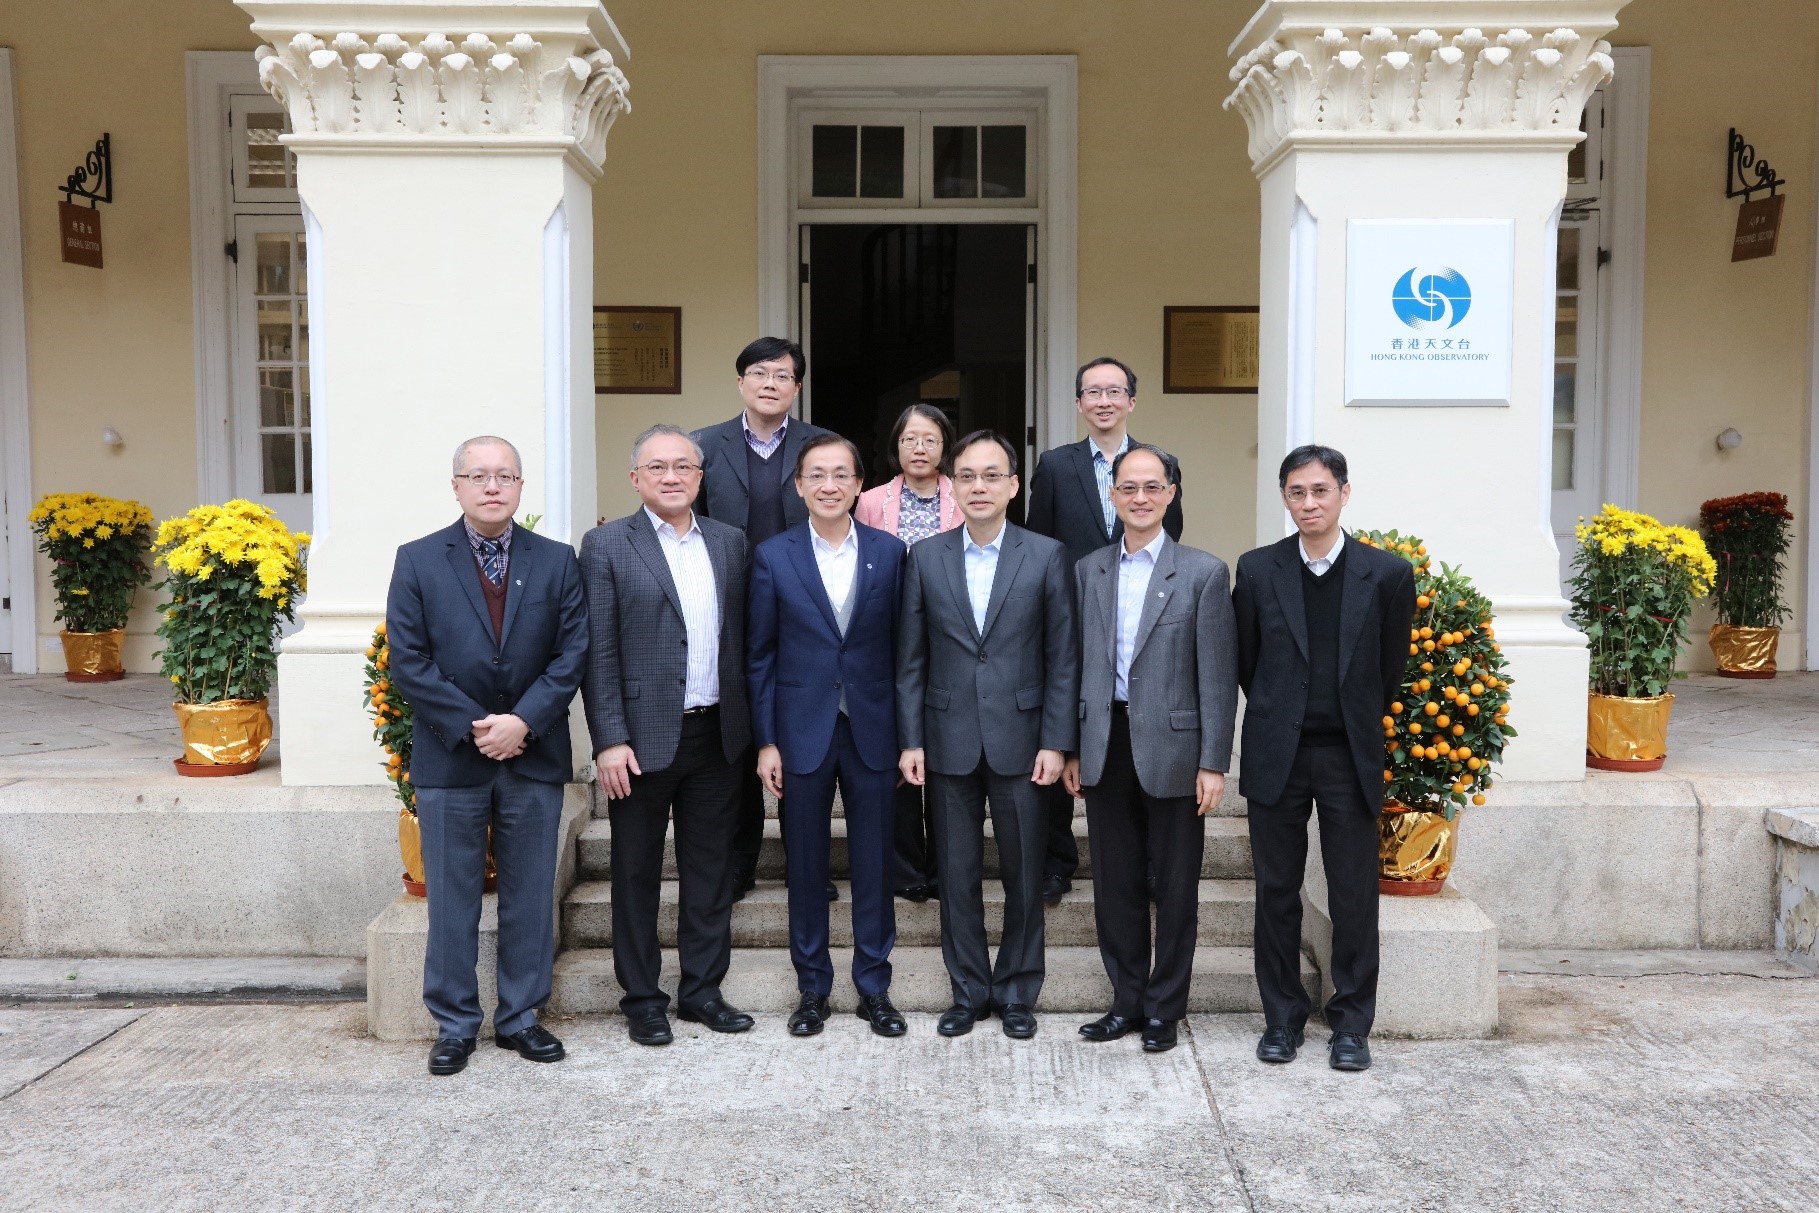 Mr Chaucer Leung Chung-yin (front row, third from right), Director-General of Communications of the Communications Authority, led a delegation to the Observatory on 22 January 2020